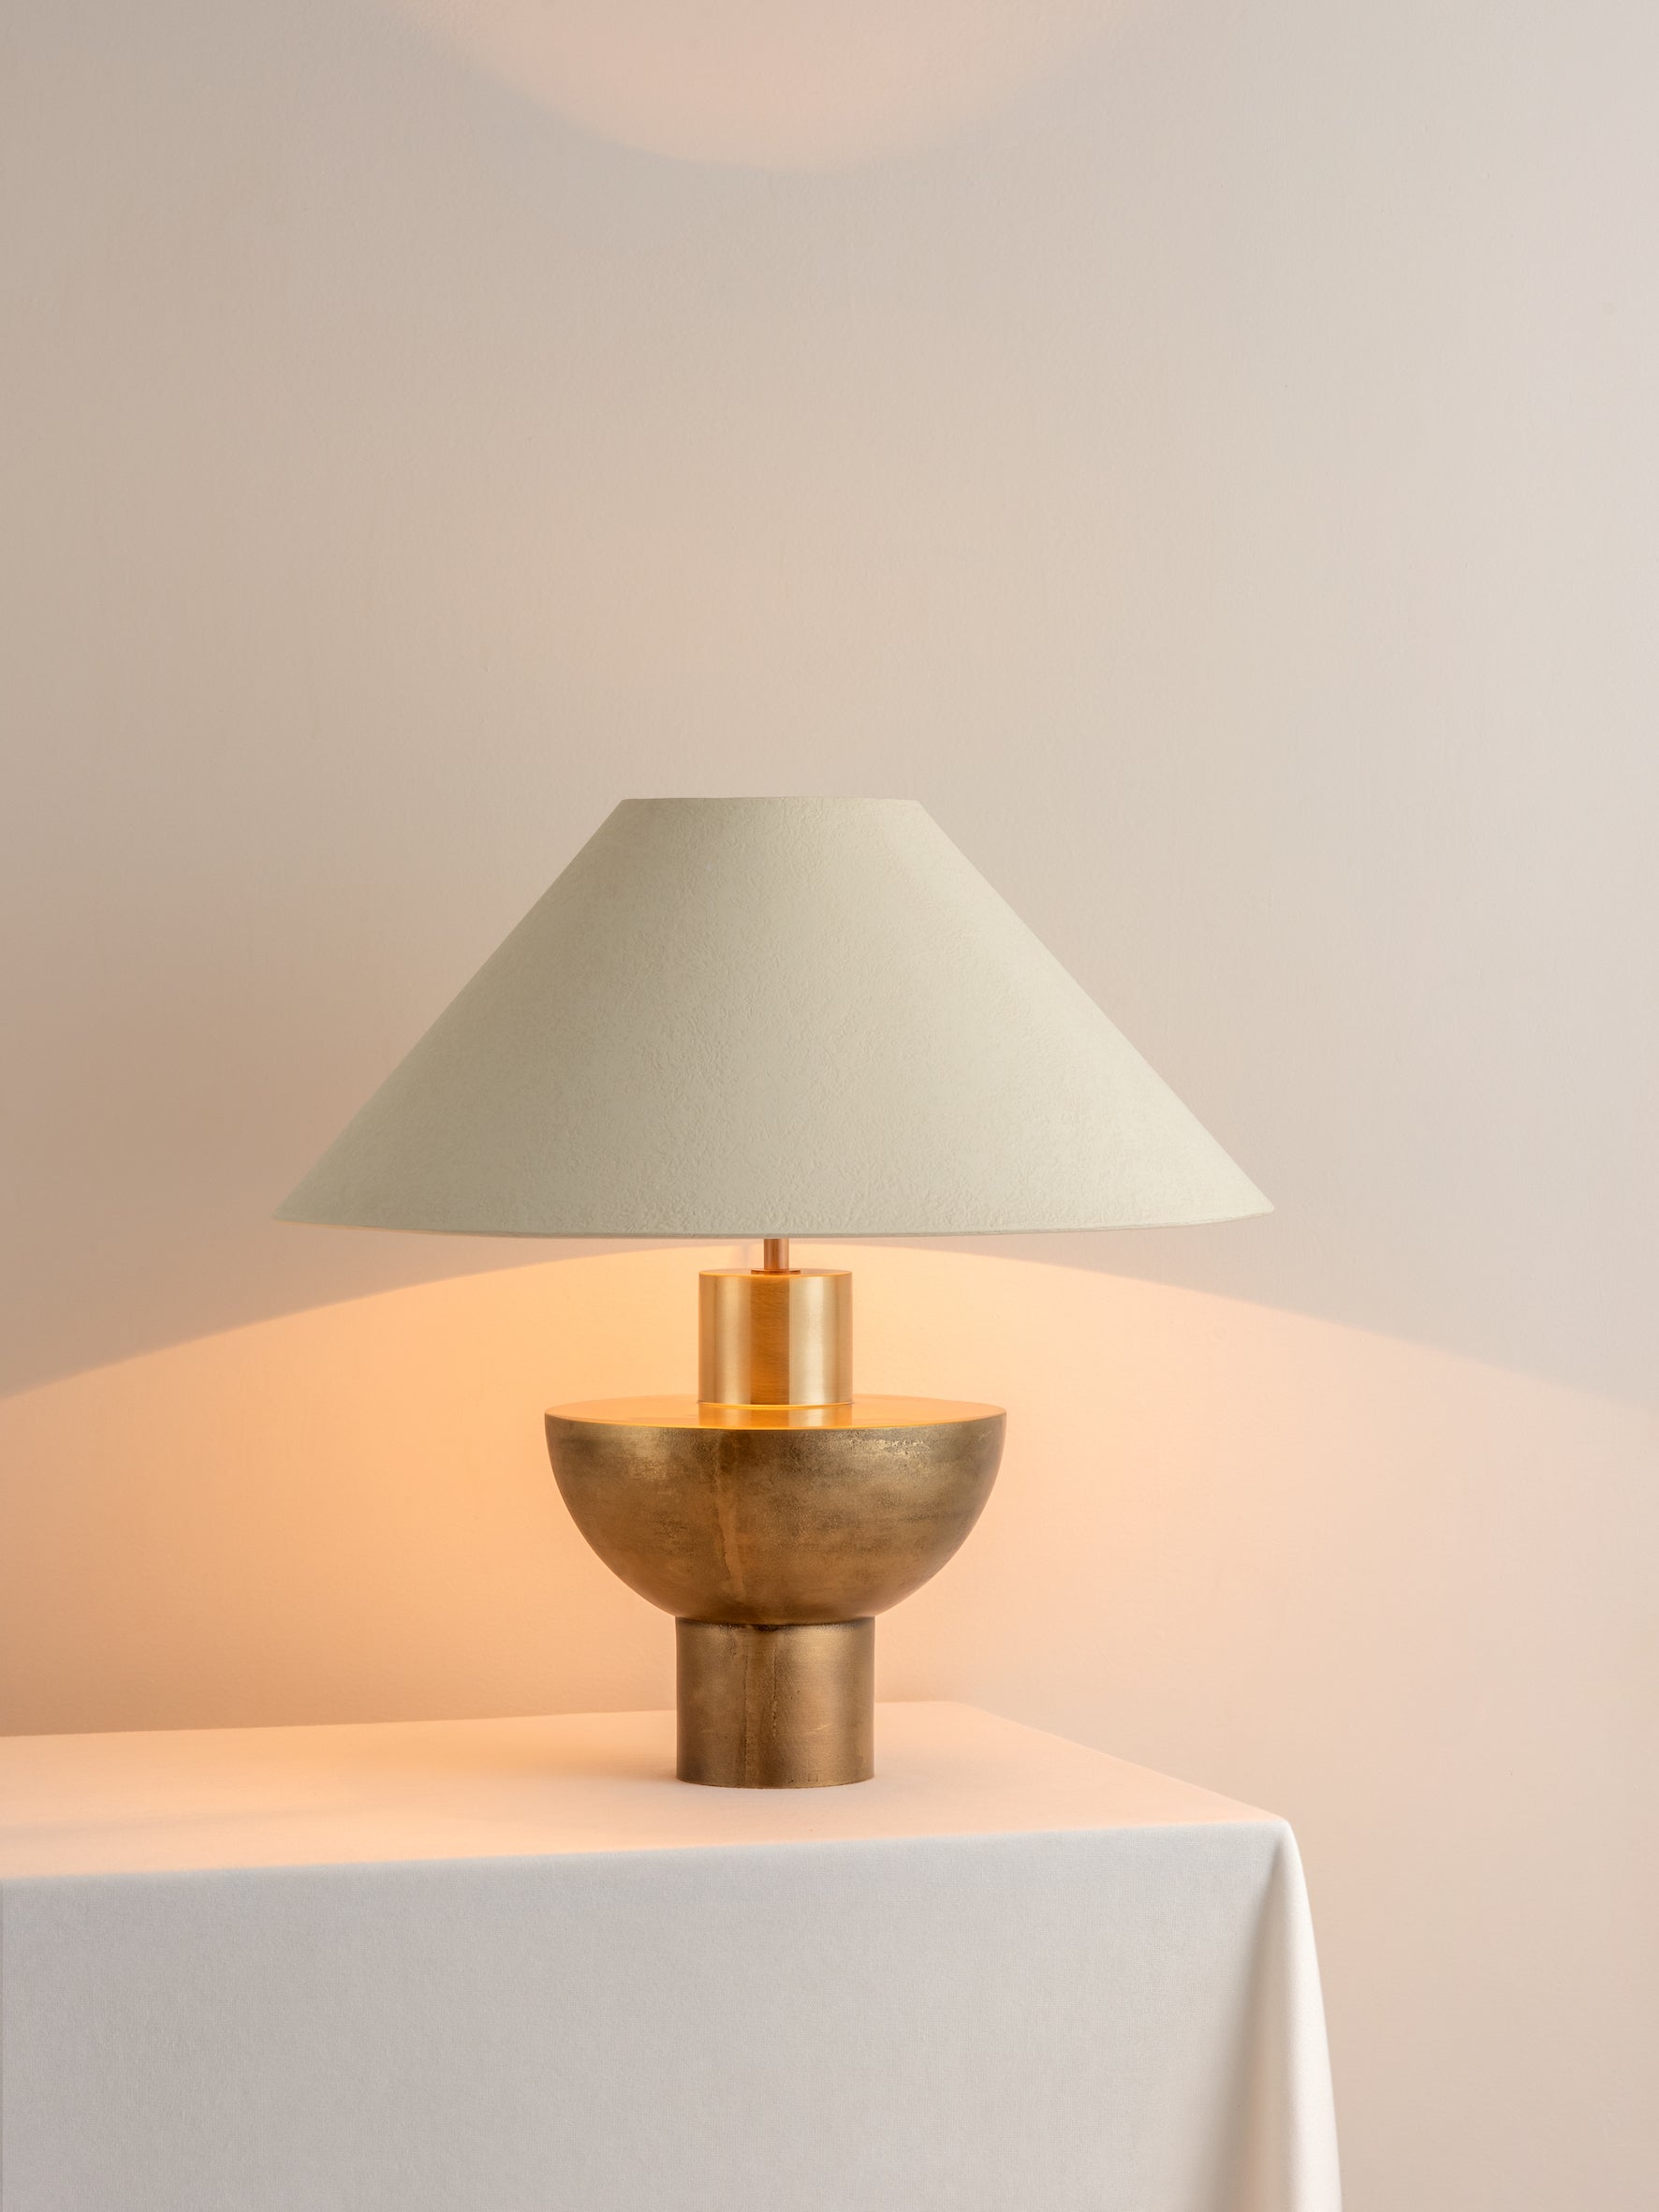 Editions brass lamp with + plaster shade | Table Lamp | Lights & Lamps Inc | Modern Affordable Designer Lighting | USA